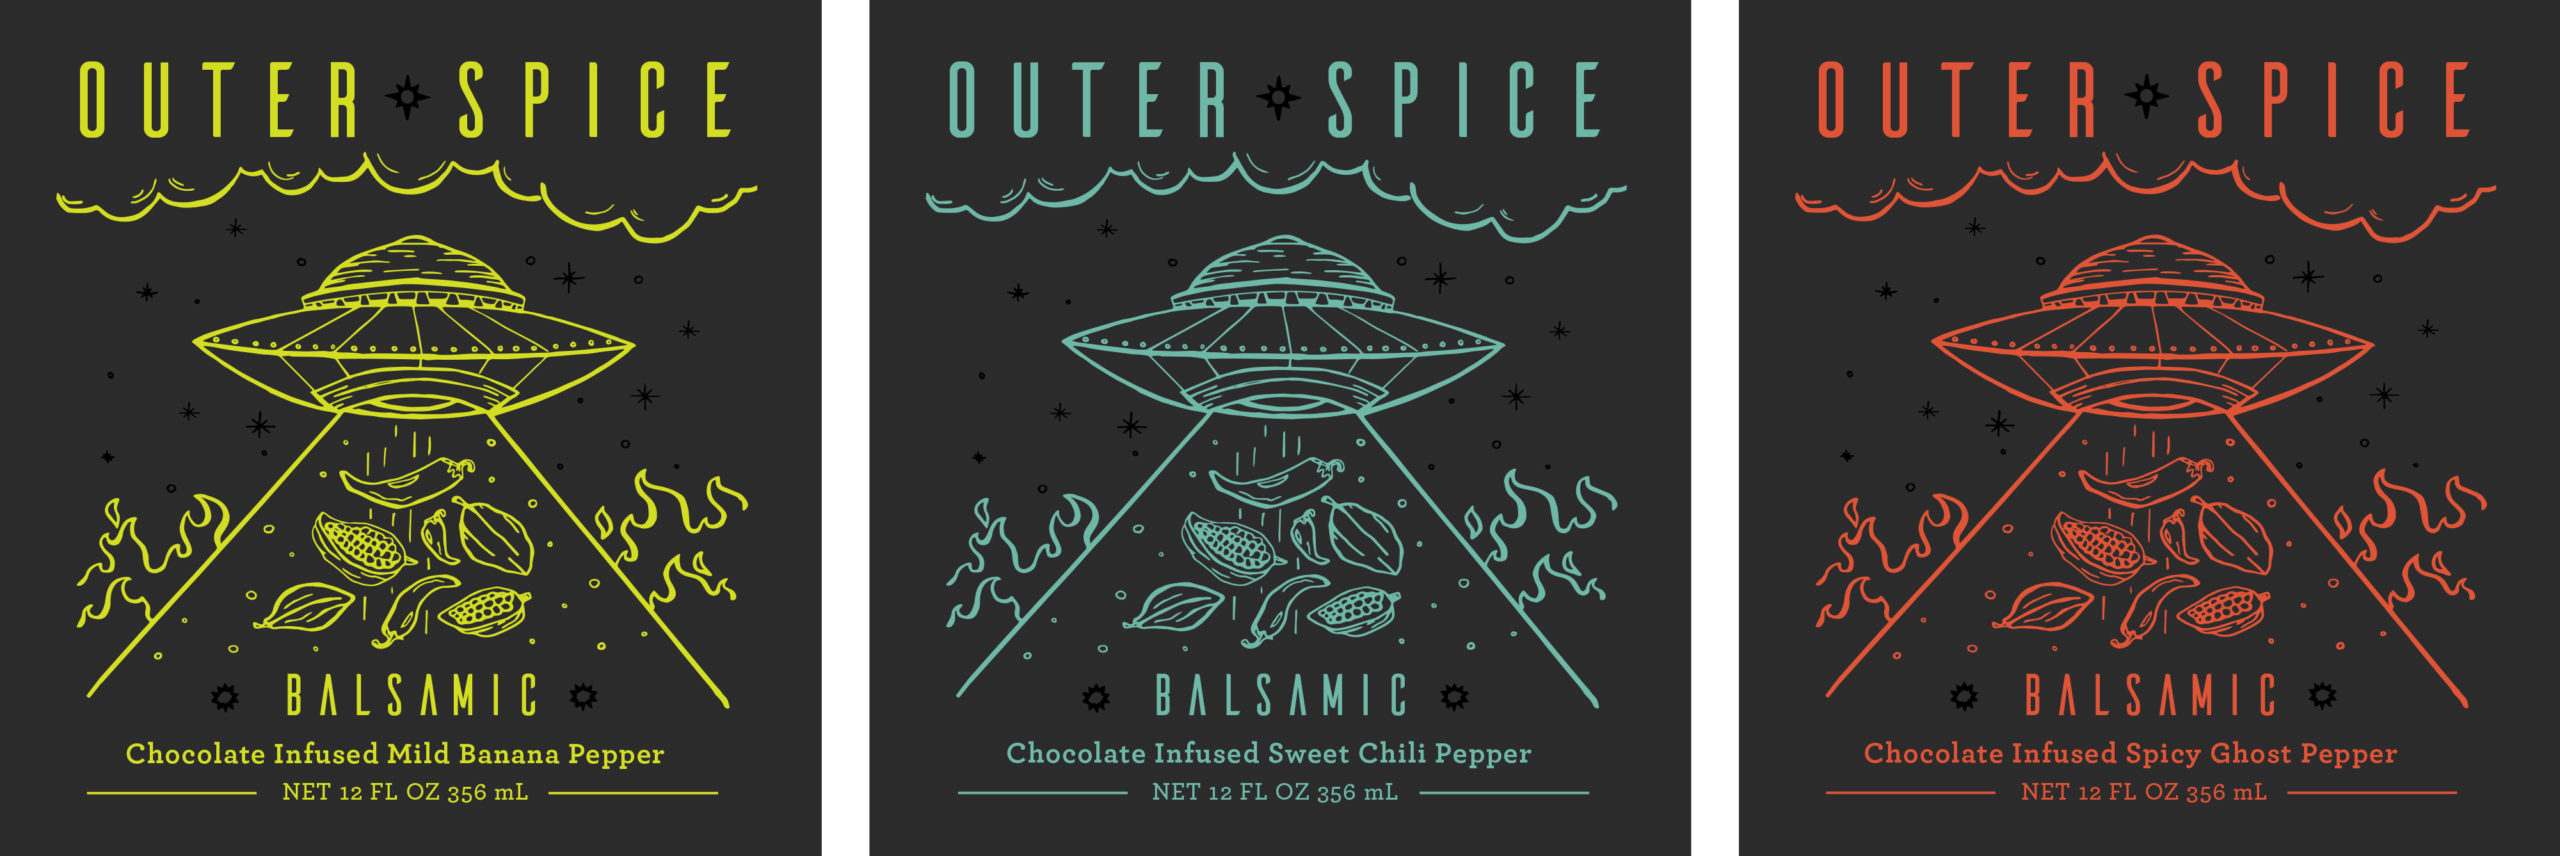 outerspice-print-1